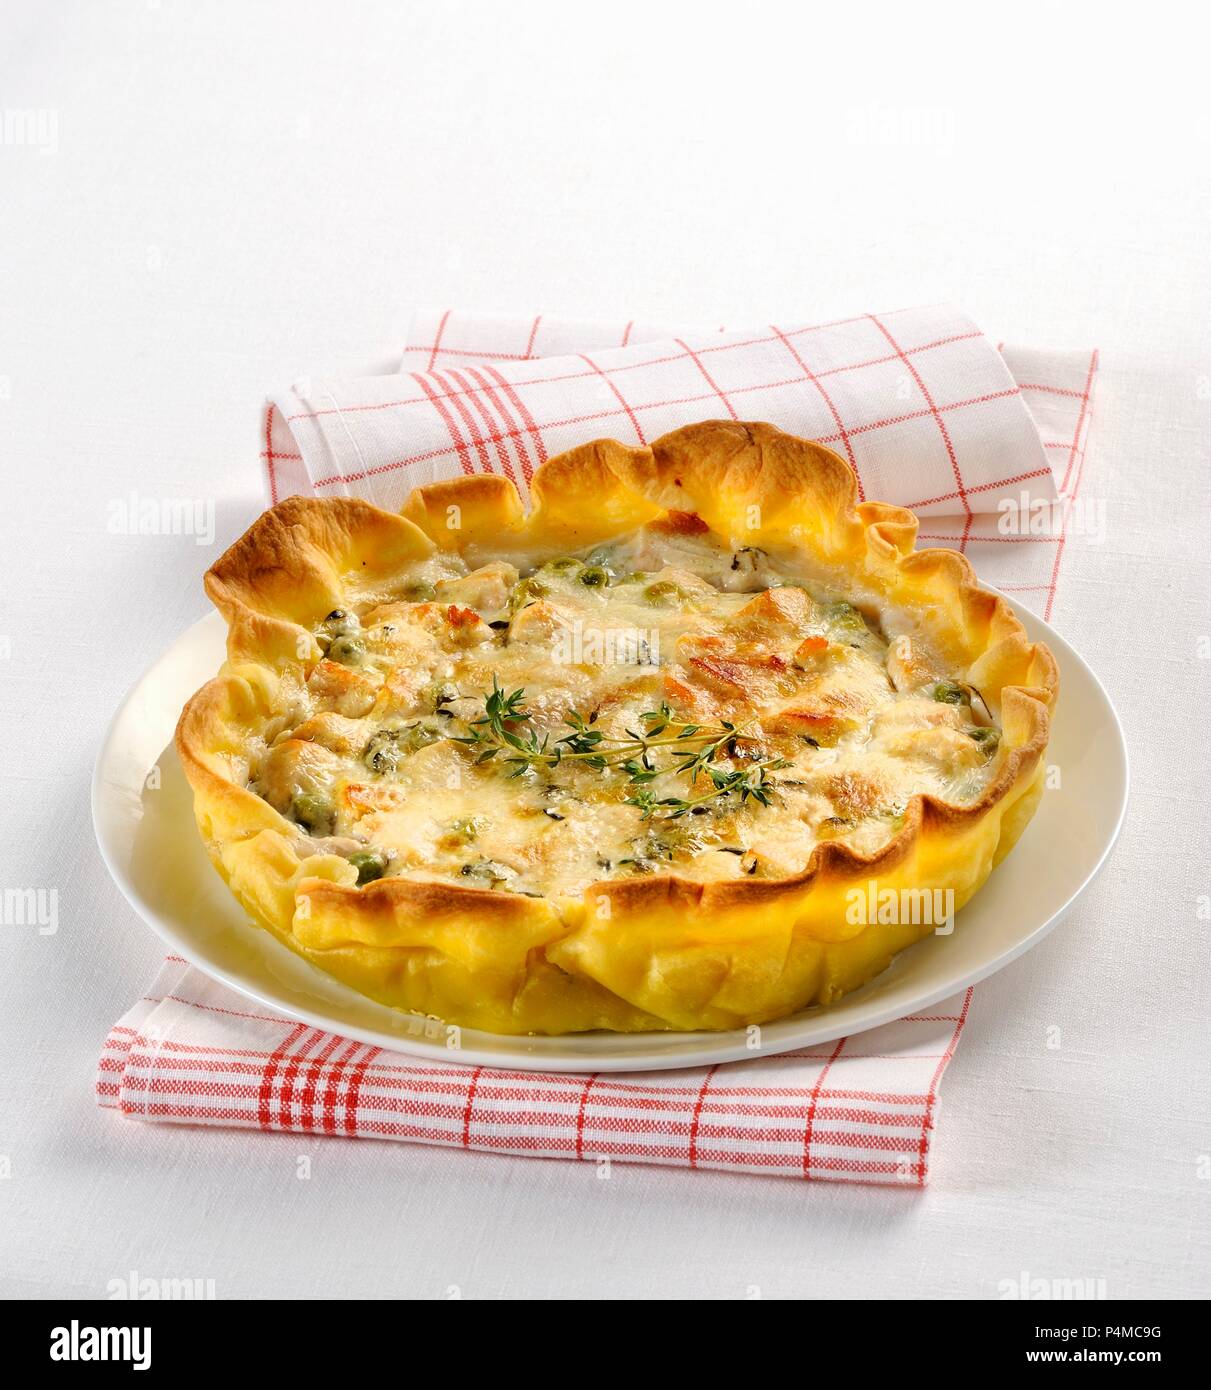 Spicy vegetable and cheese tart Stock Photo